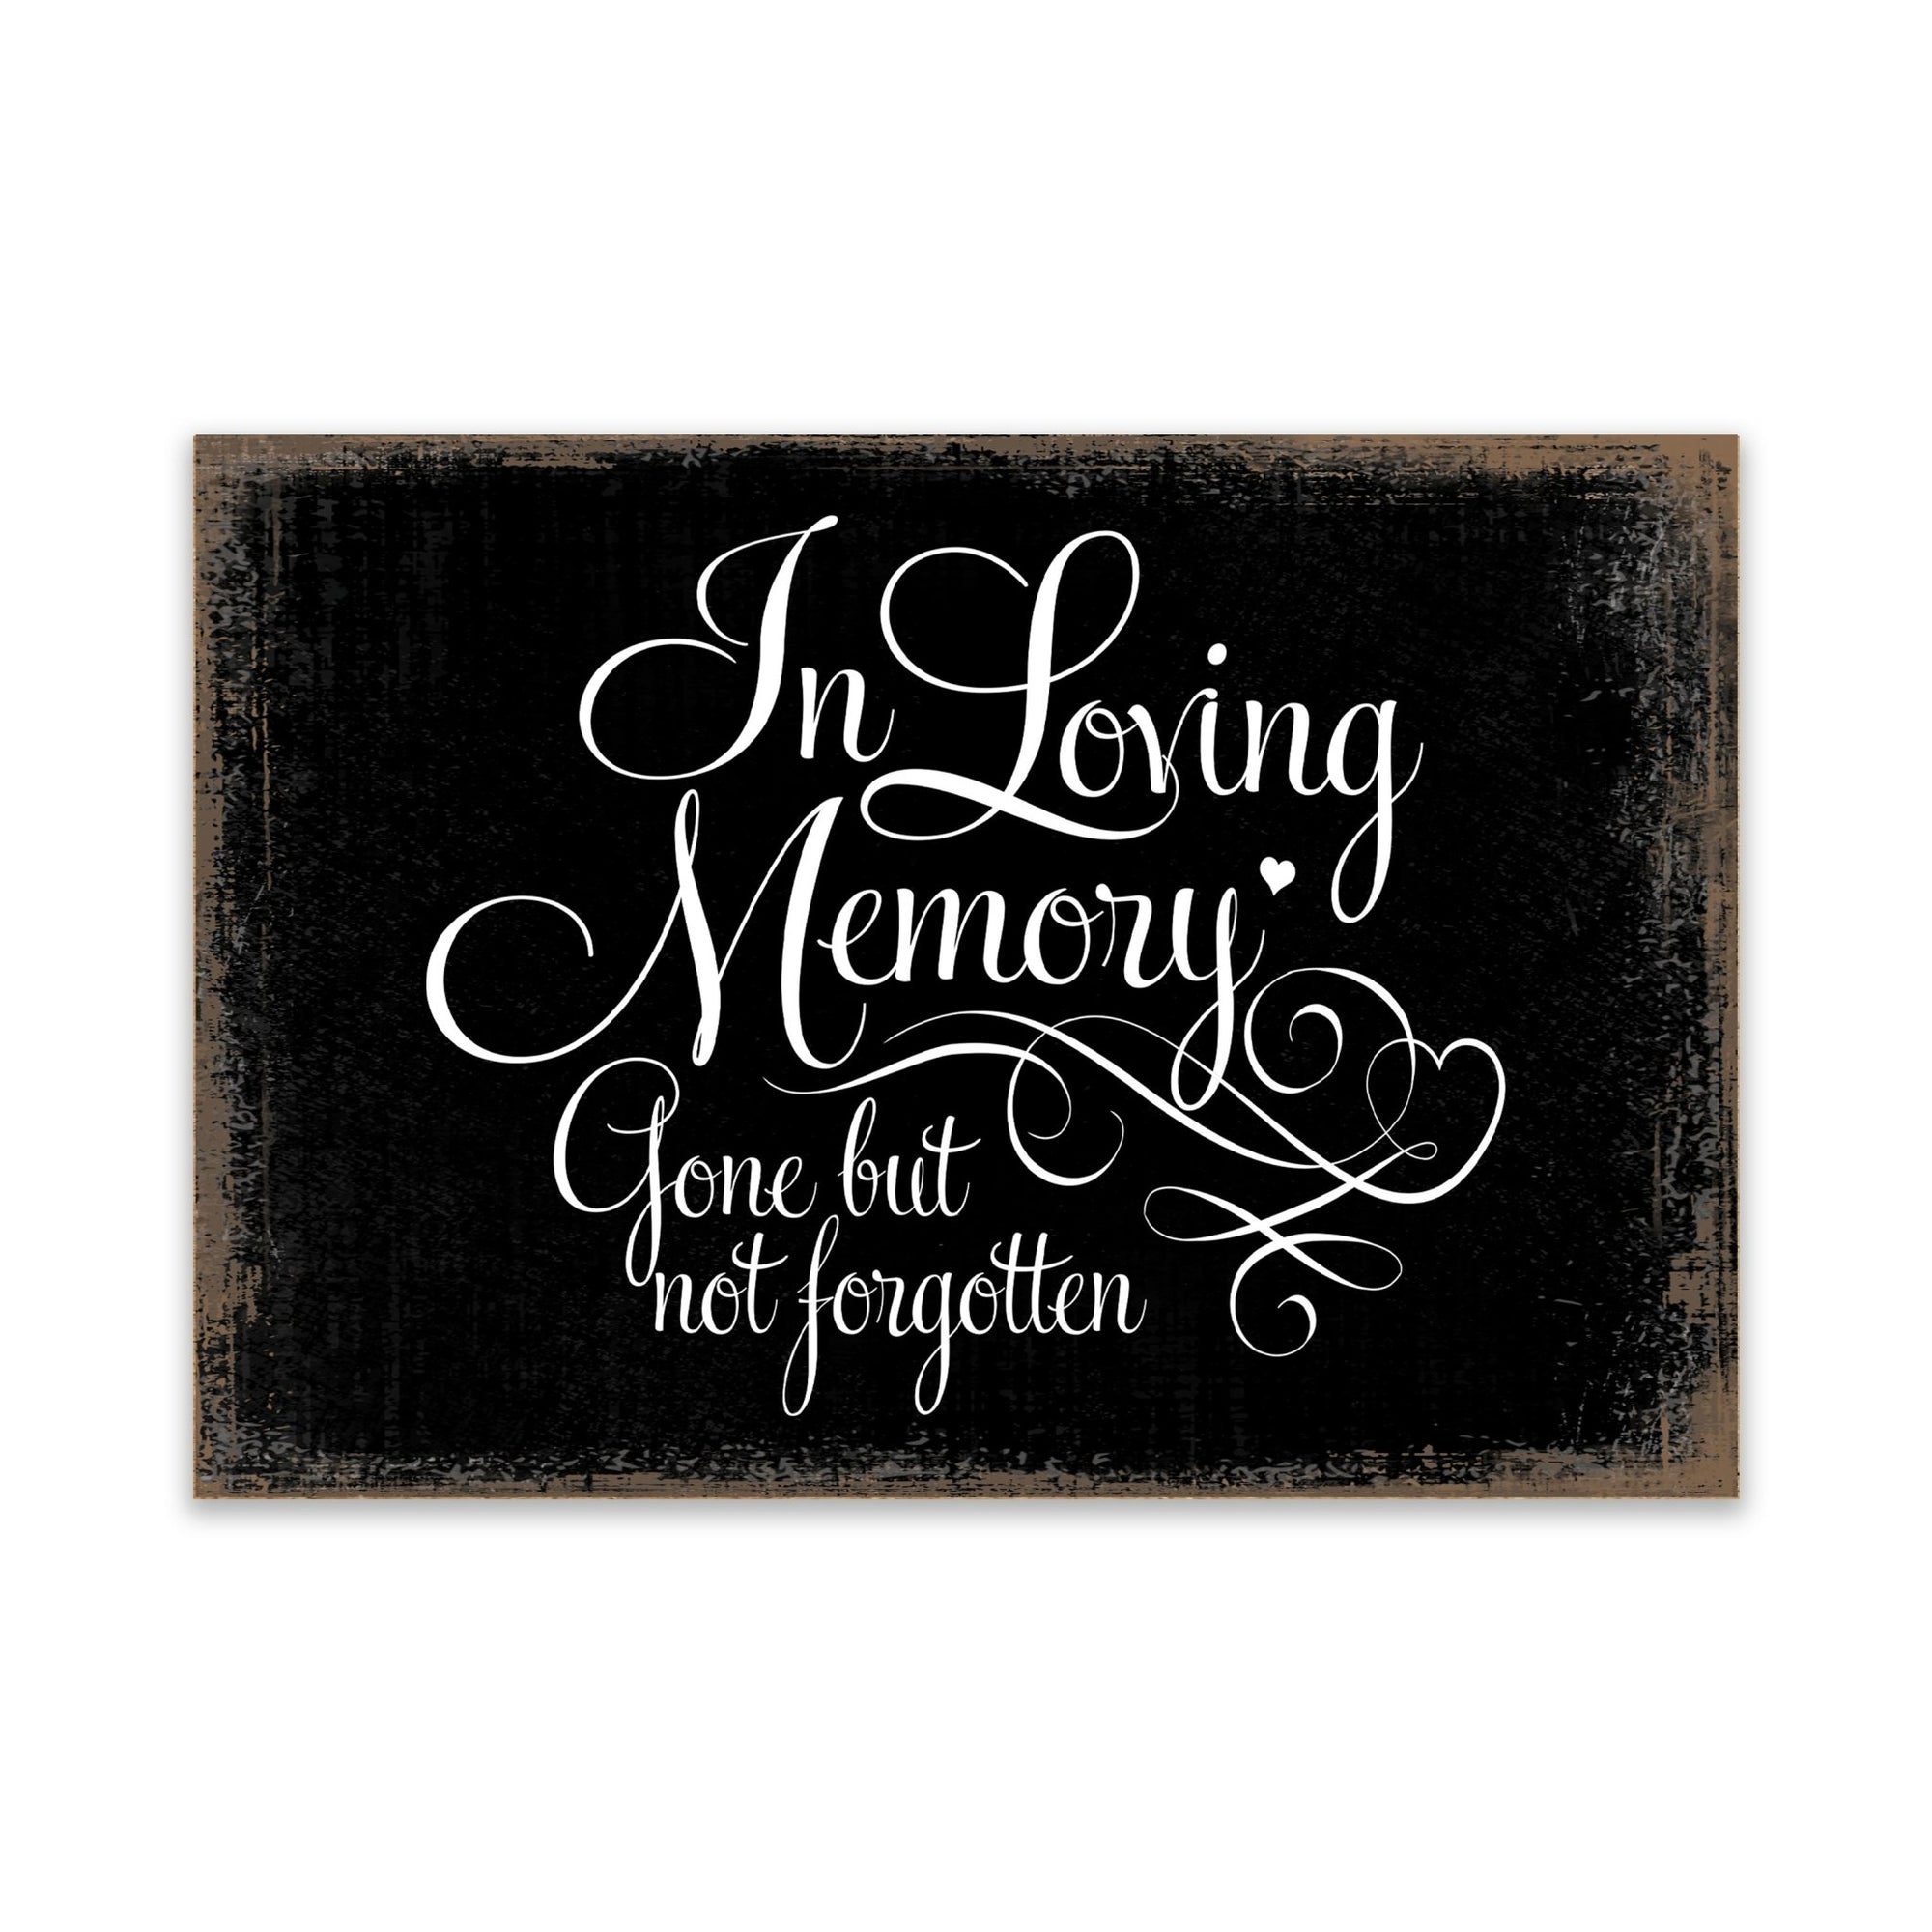 Modern Inspirational Memorial 5.5x 8 inches Wooden Sign Gone But Not Forgotten - Plaque Tabletop Decoration Loss of Loved One Bereavement Sympathy Keepsake - LifeSong Milestones